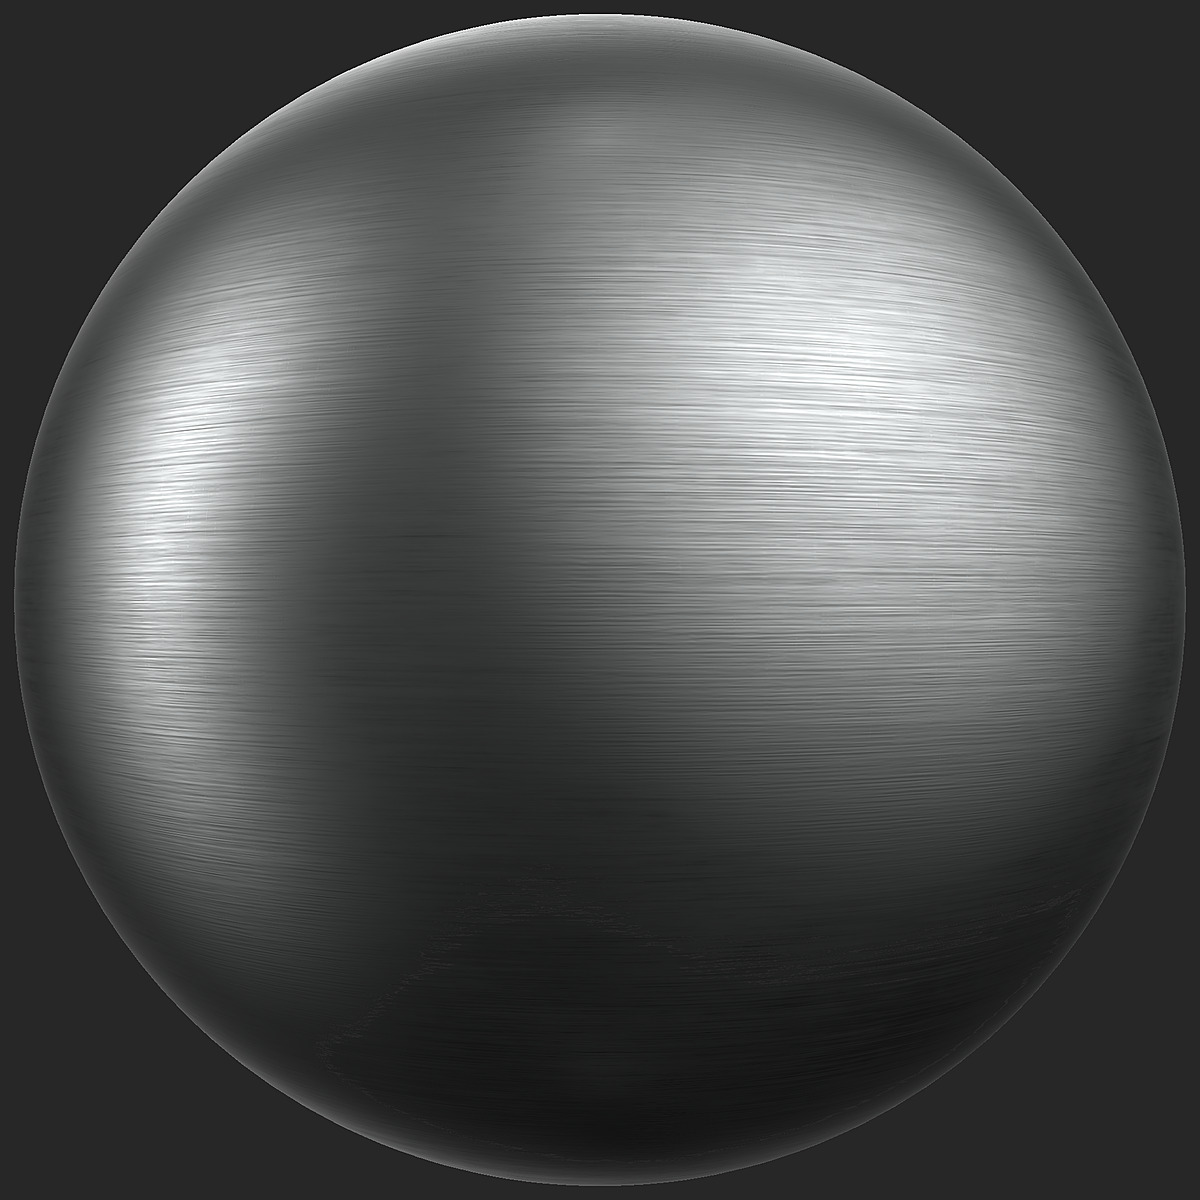 Burnished Metal Texture With Polished Lines Free Pbr Texturecan